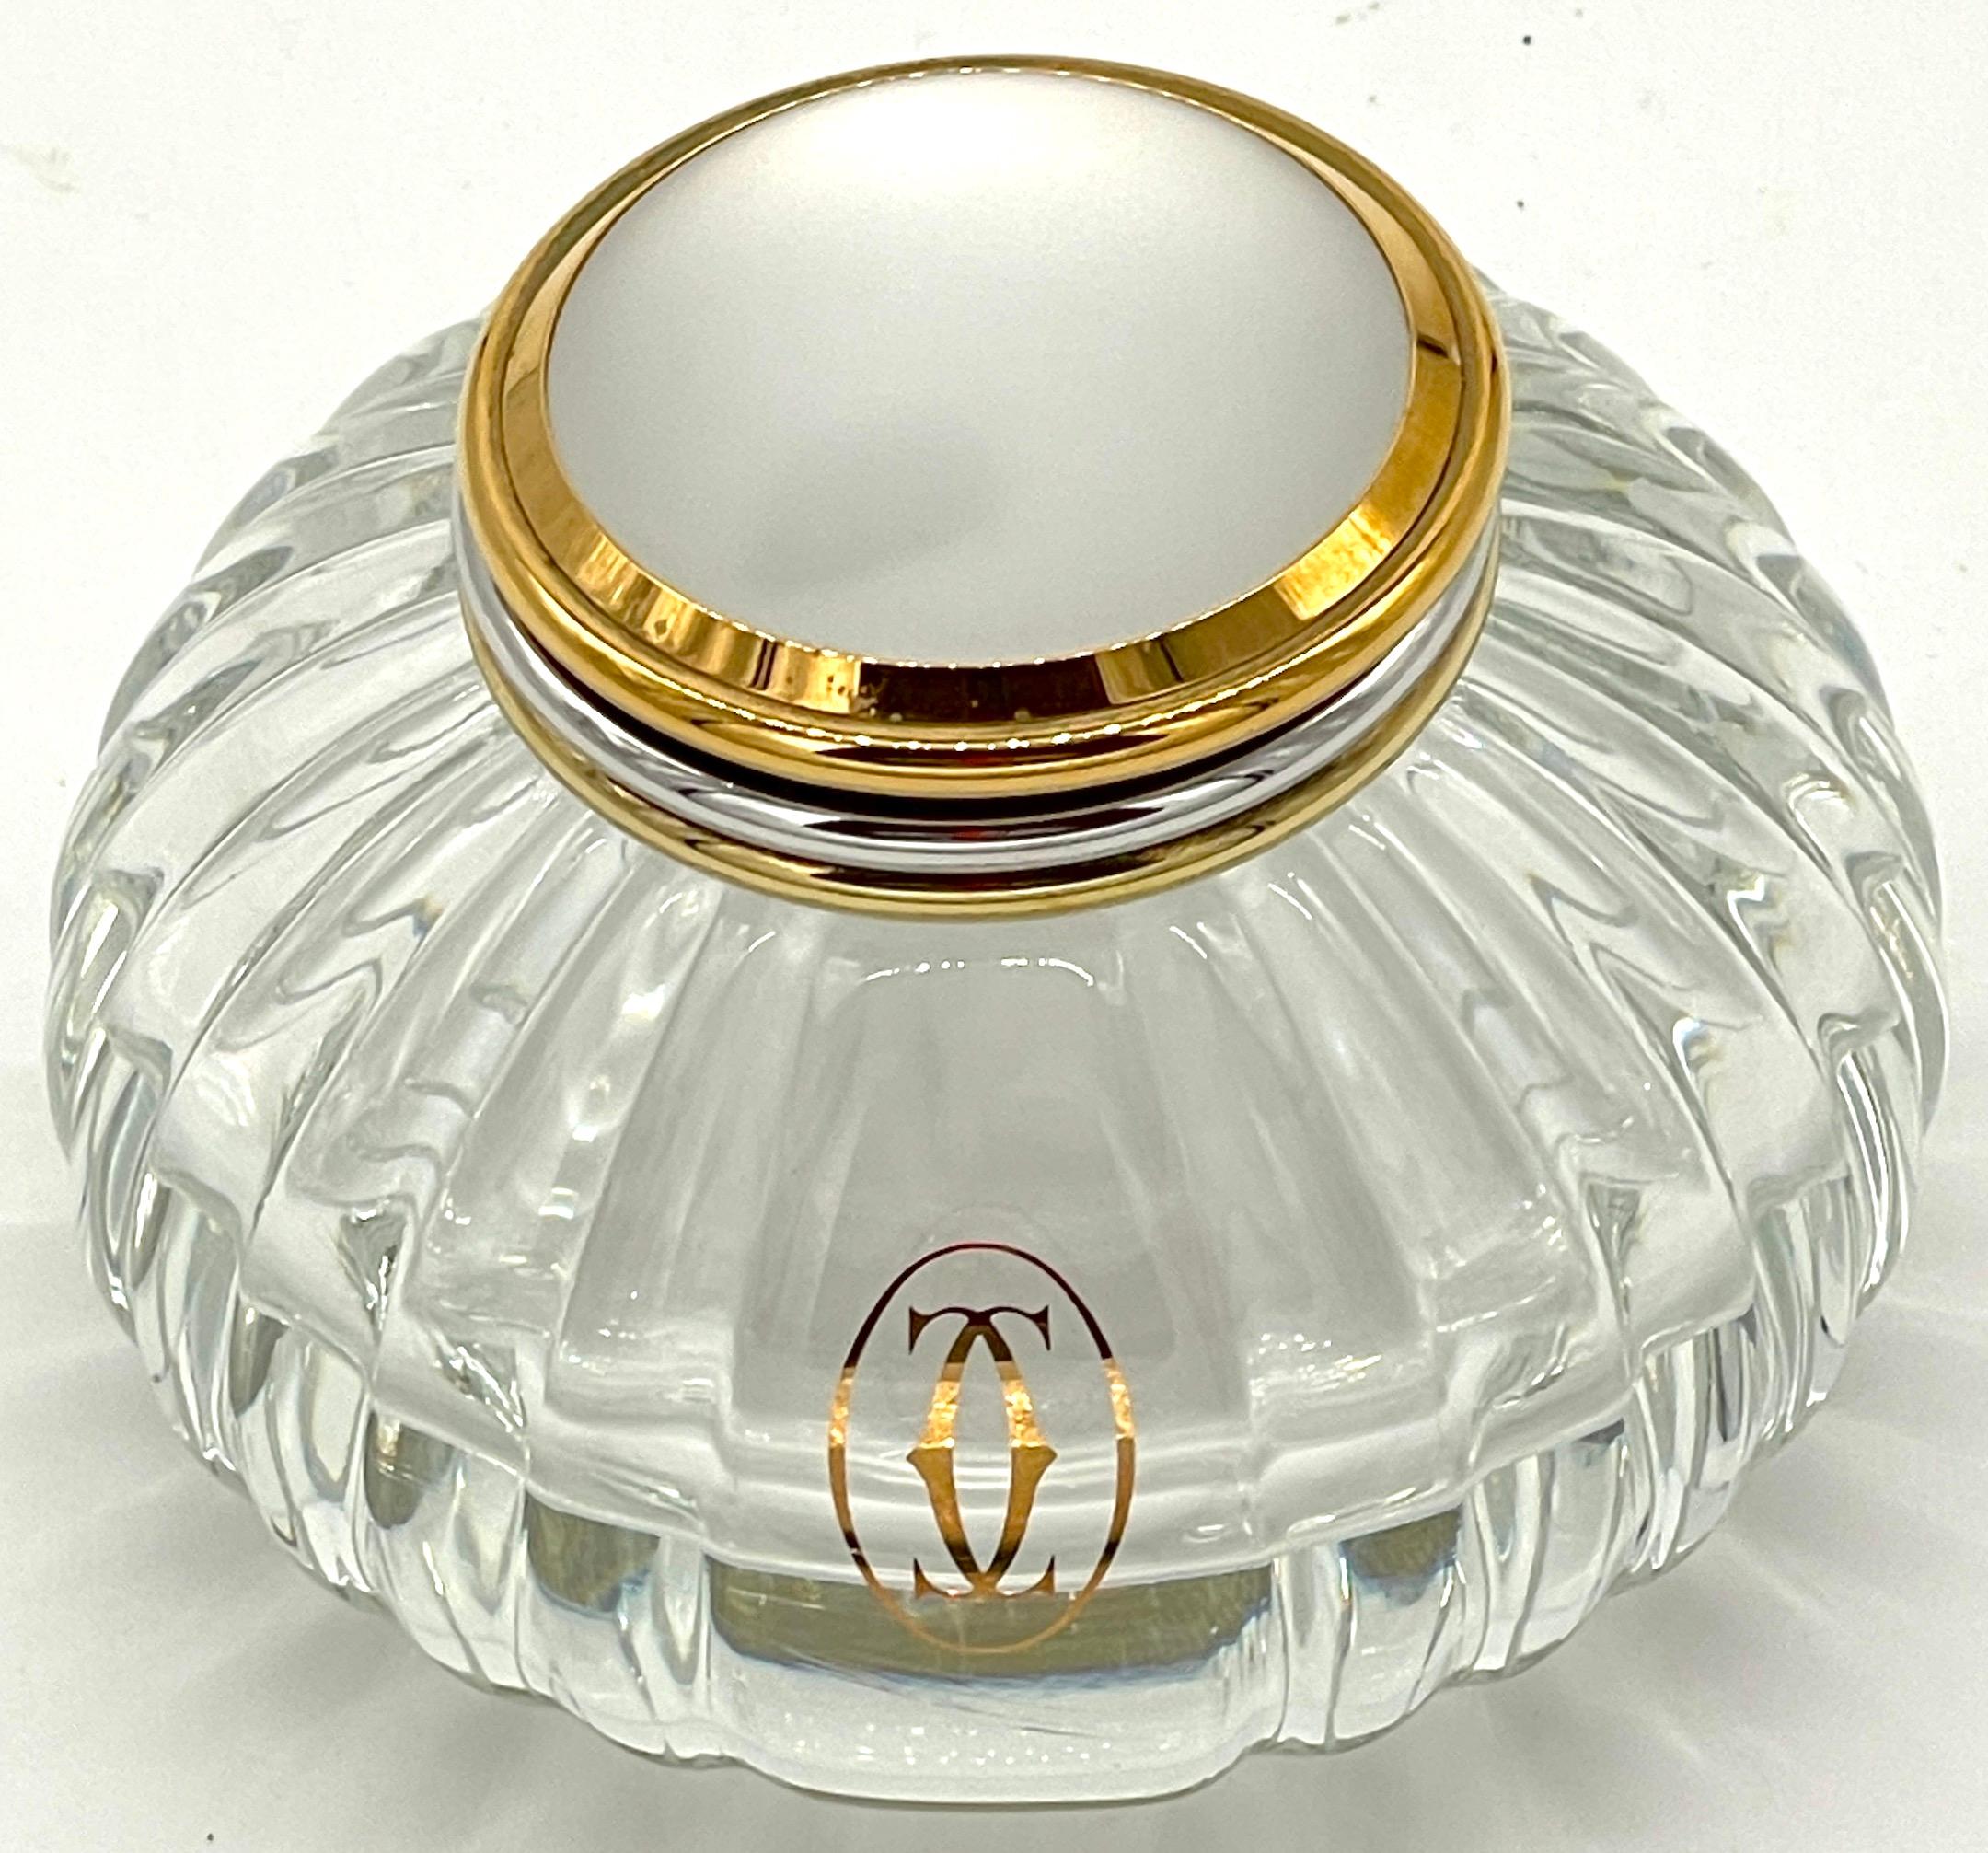 Cartier 'Must de Cartier' Crystal Gilt and Silver Mellon Inkwell
France, Circa 1989

Cartier 'Must de Cartier' crystal gilt and silver mellon inkwell, made in France around 1989. This understated inkwell is a true representation of Cartier's